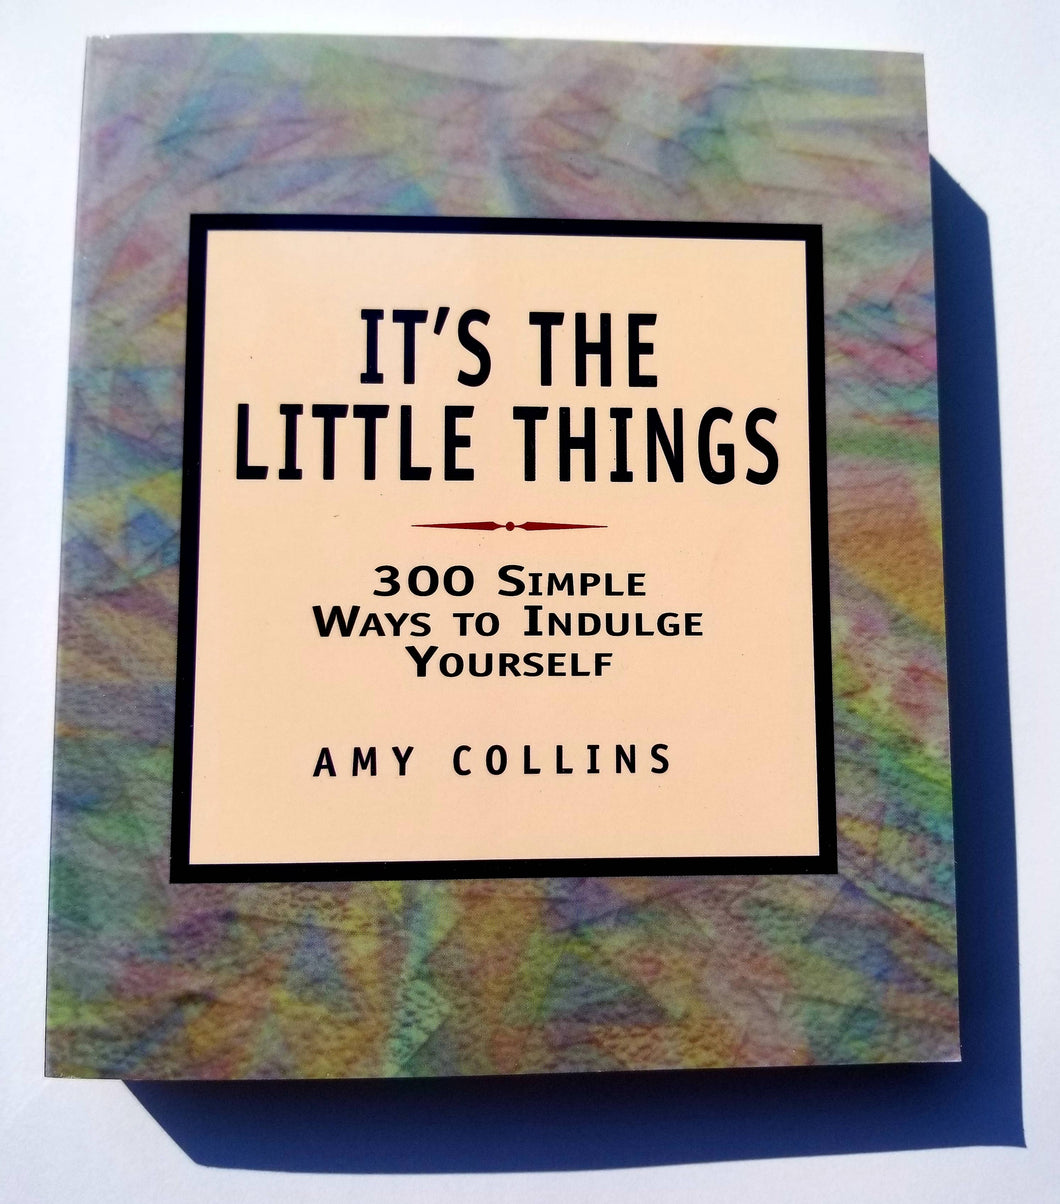 It's the Little Things: 300 Simple Ways to Indulge Yourself